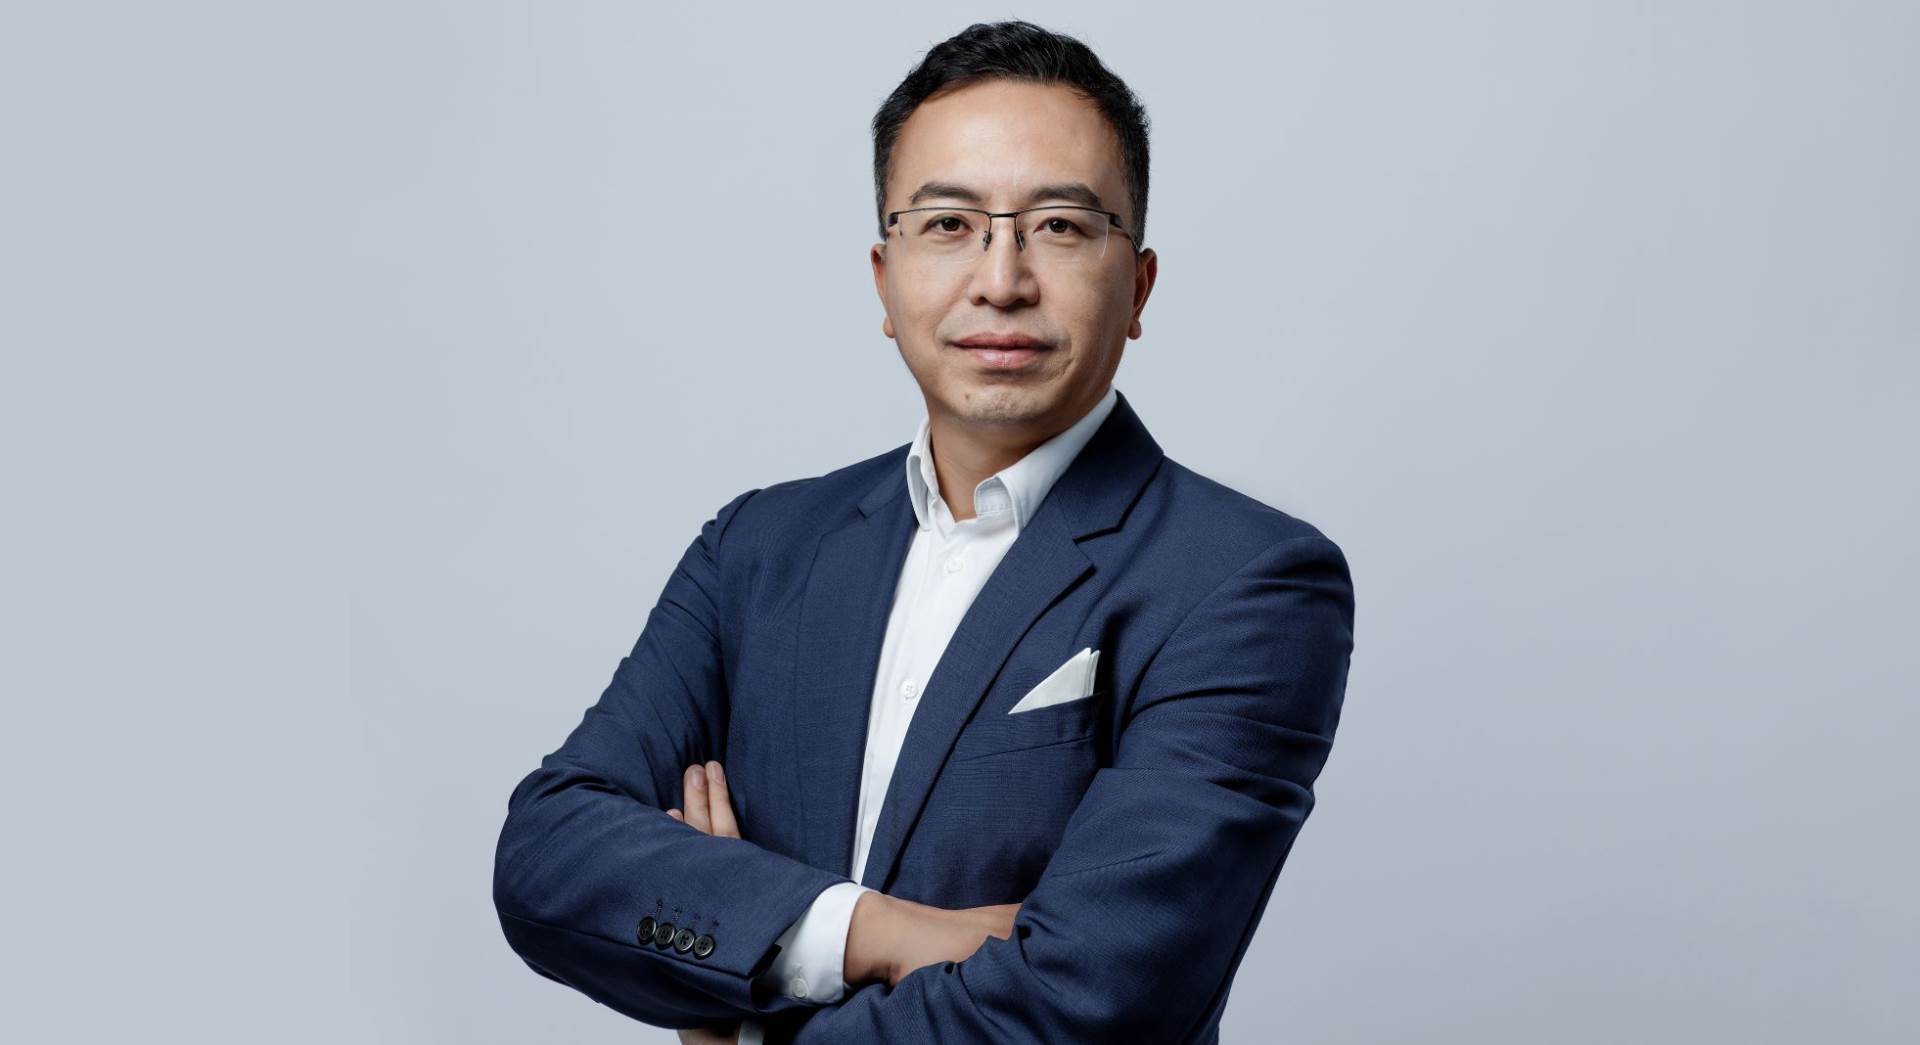  George Zhao, CEO of HONOR.jpg 